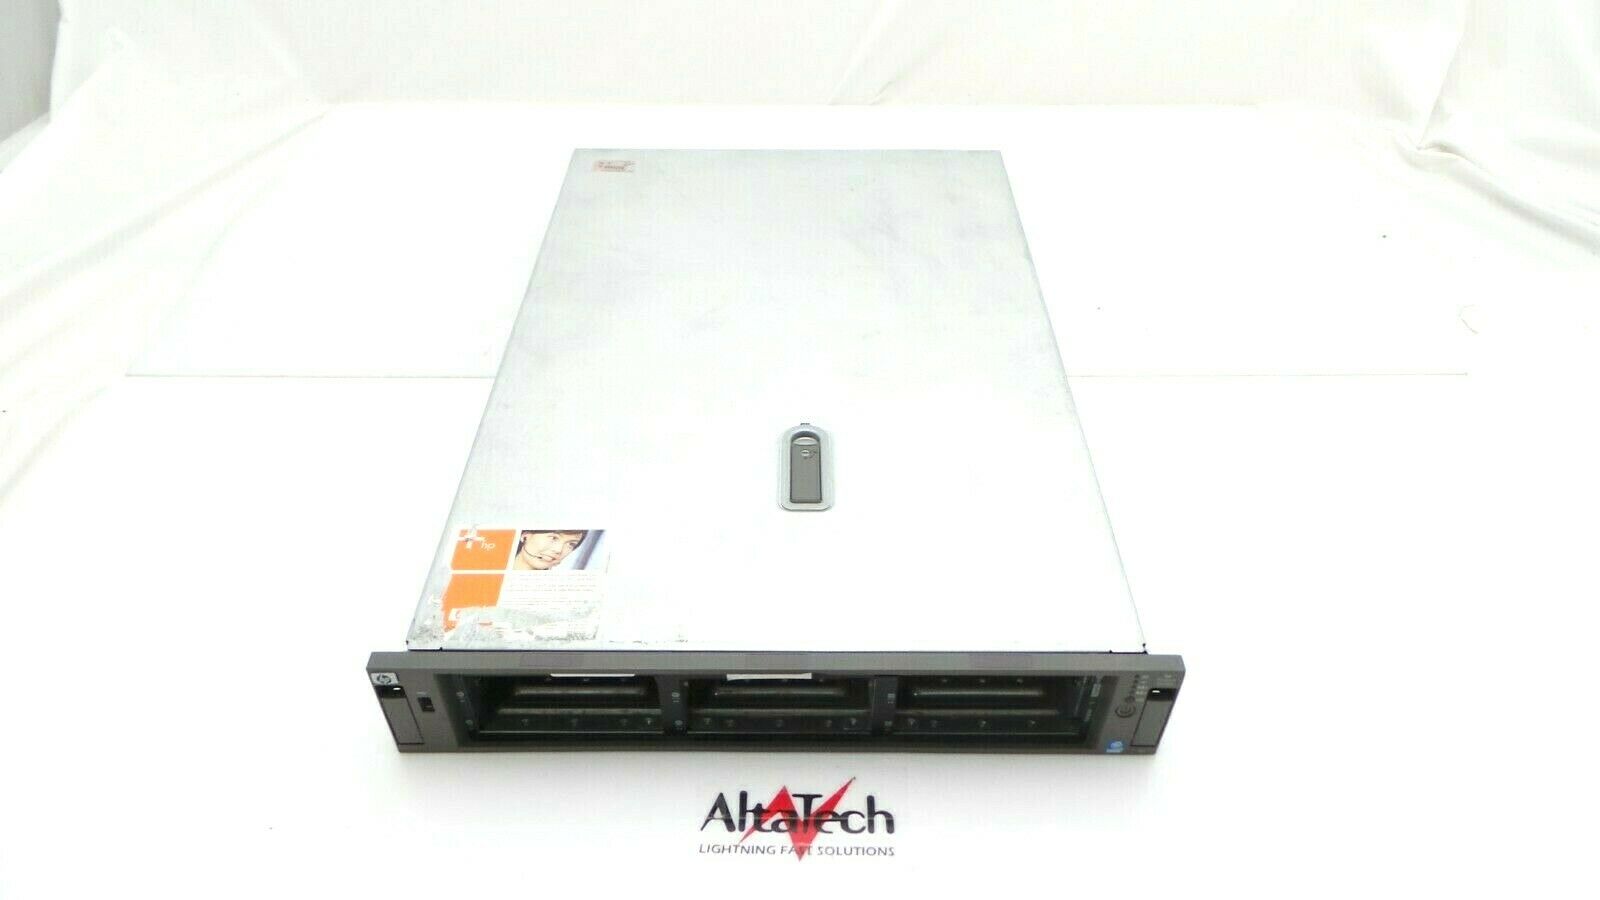 HP 371293-405 Proliant DL380 G4 Base Model CTO Chassis, Used